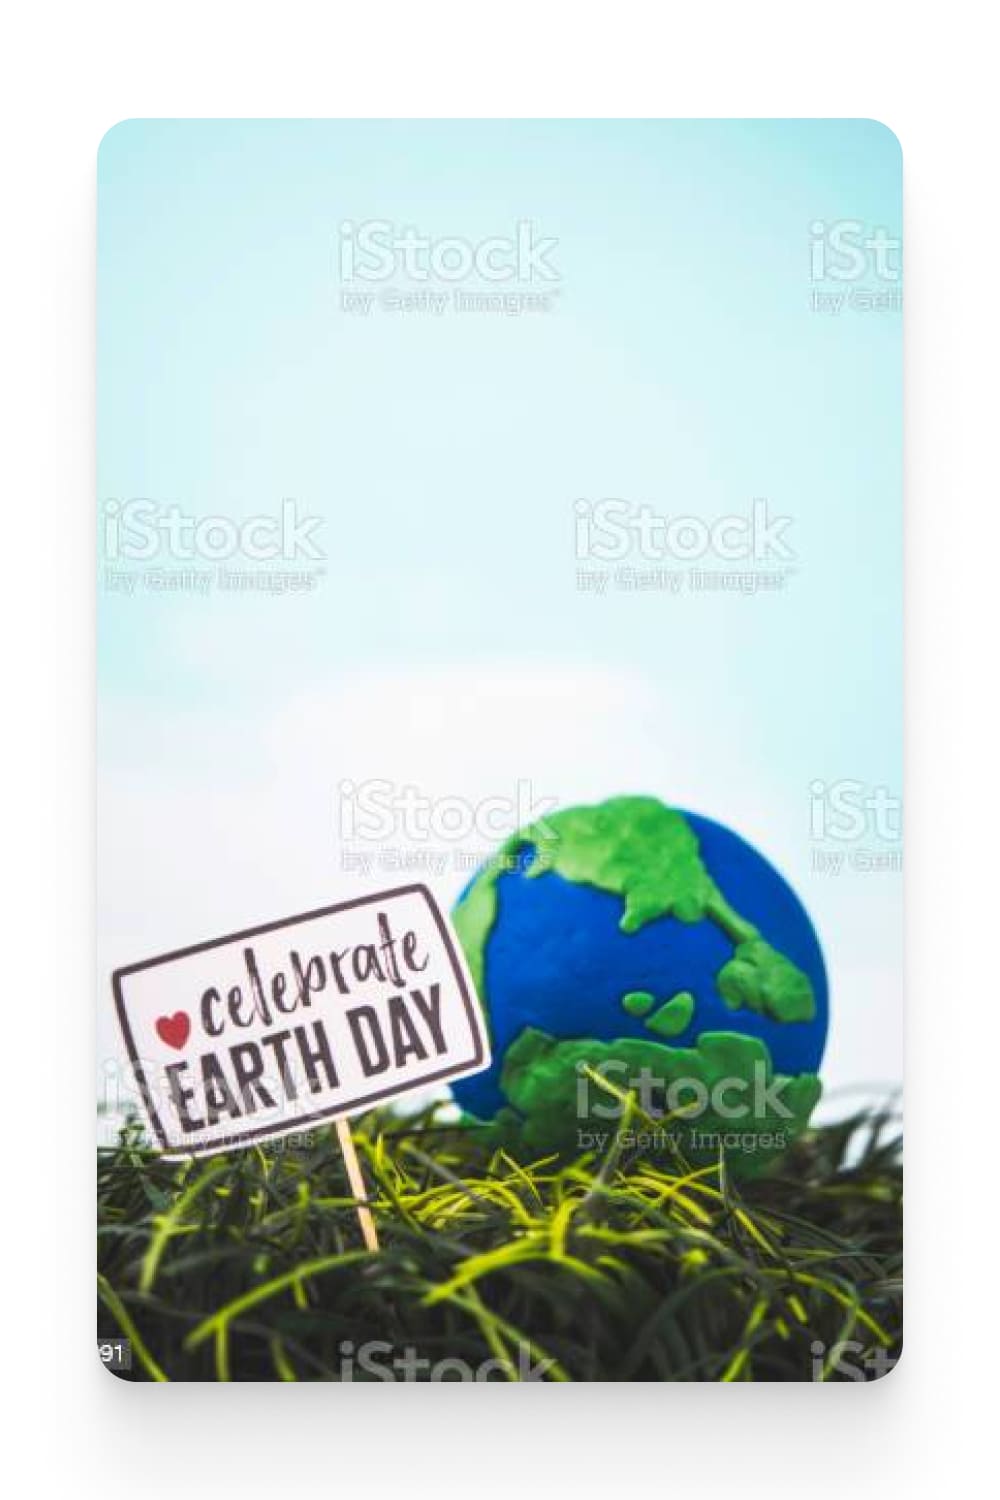 Handmade globe in grass with sign to Celebrate Earth Day. Save the planet *Earth prop.